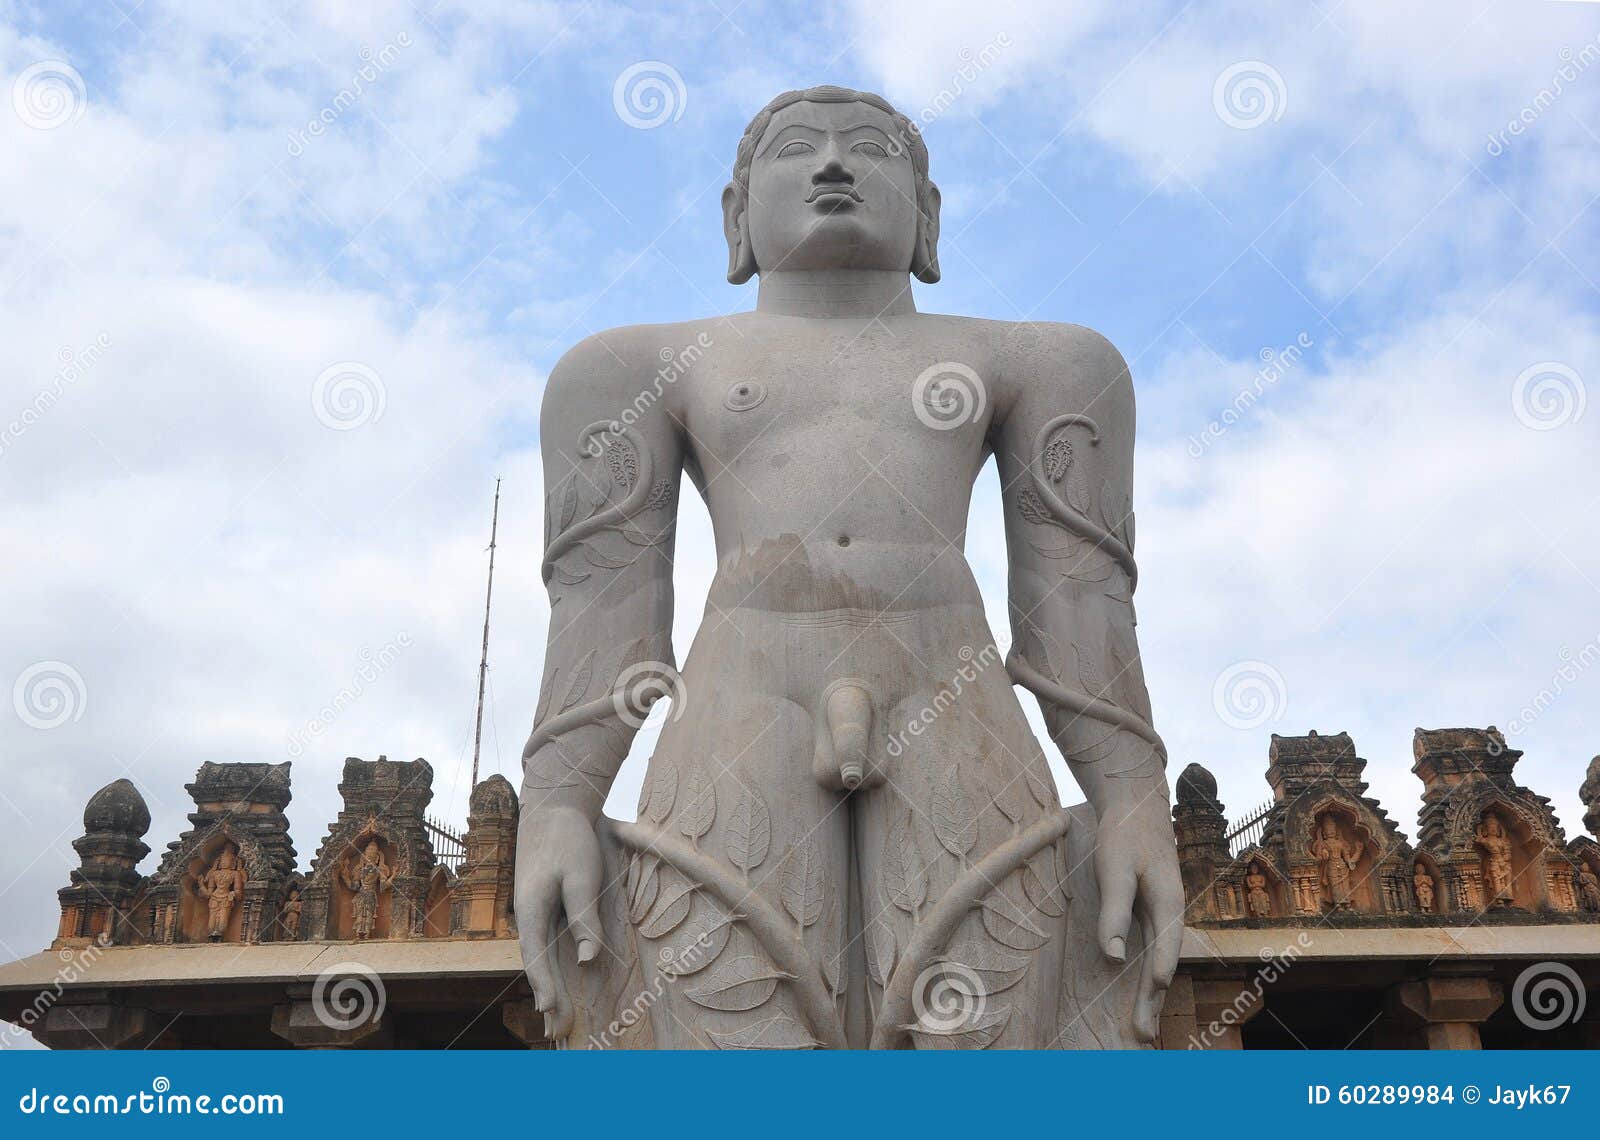 Big dick buddha statue funny pictures